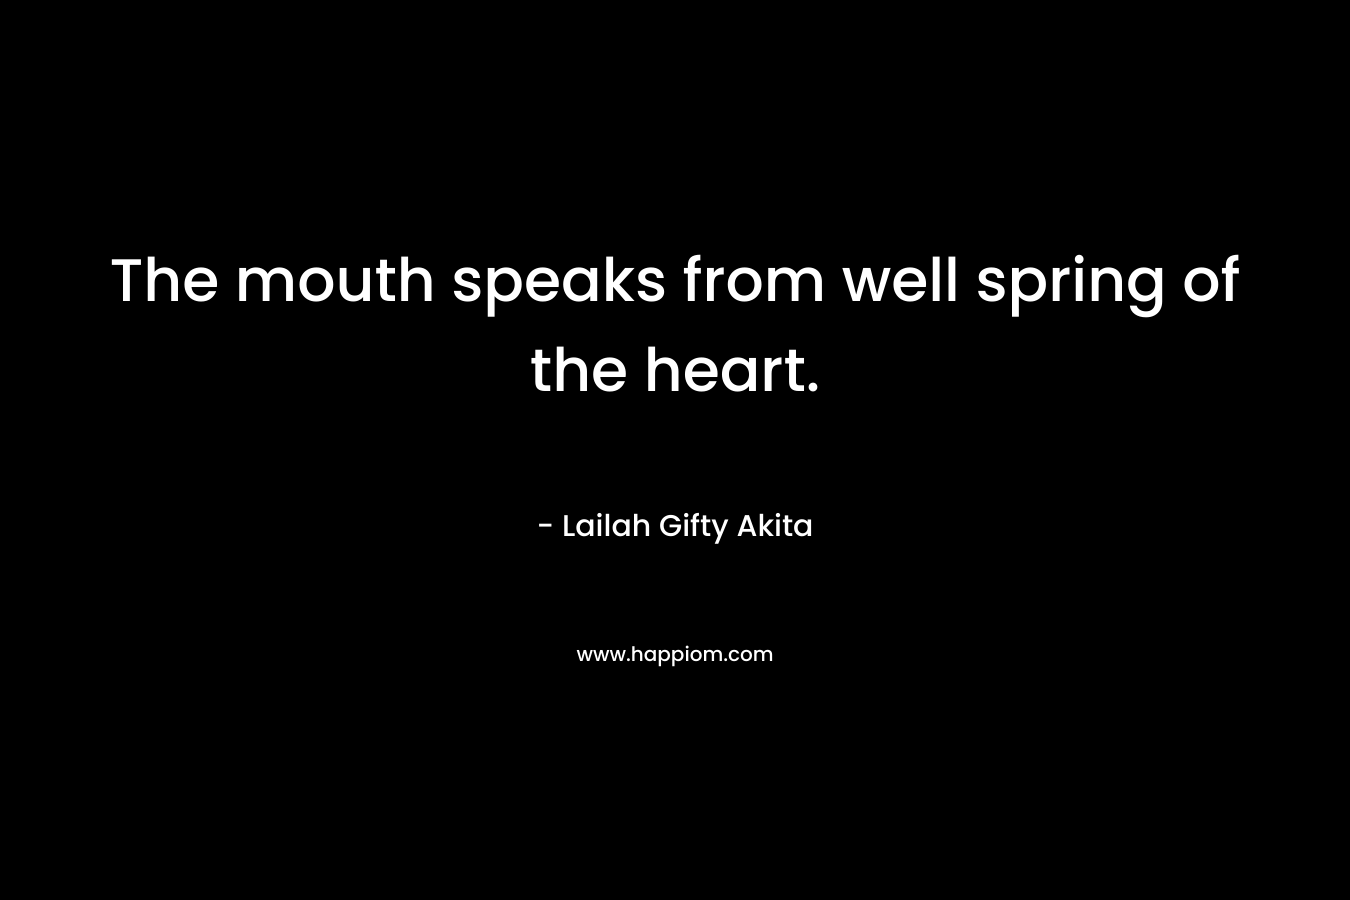 The mouth speaks from well spring of the heart.